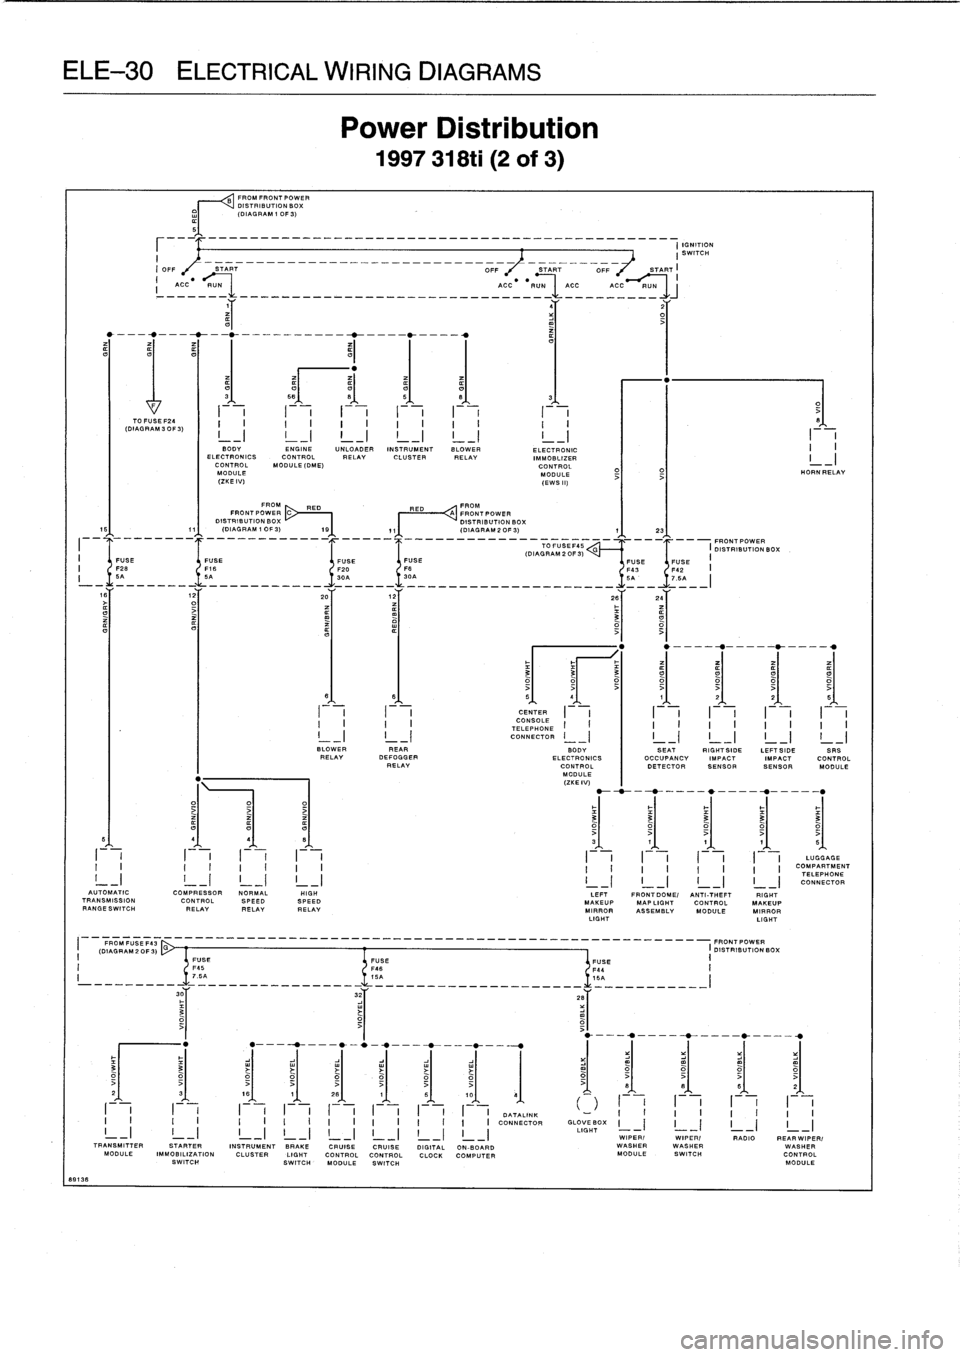 BMW 323i 1995 E36 Service Manual 
ELE-30
ELECTRICAL
WIRING
DIAGRAMS

I
ACC
-R=_
____-____-______________
ACC
-
RUN

	

ACC
-_-C~

4Y

	

2Y

I

	

I

TO
FUSE
F24
(DIAGRAM
30F
3)

FROM
FRONT
POWER
DISTRIBUTION
BOX
(DIAGRAM
1
0F3)
IGNI